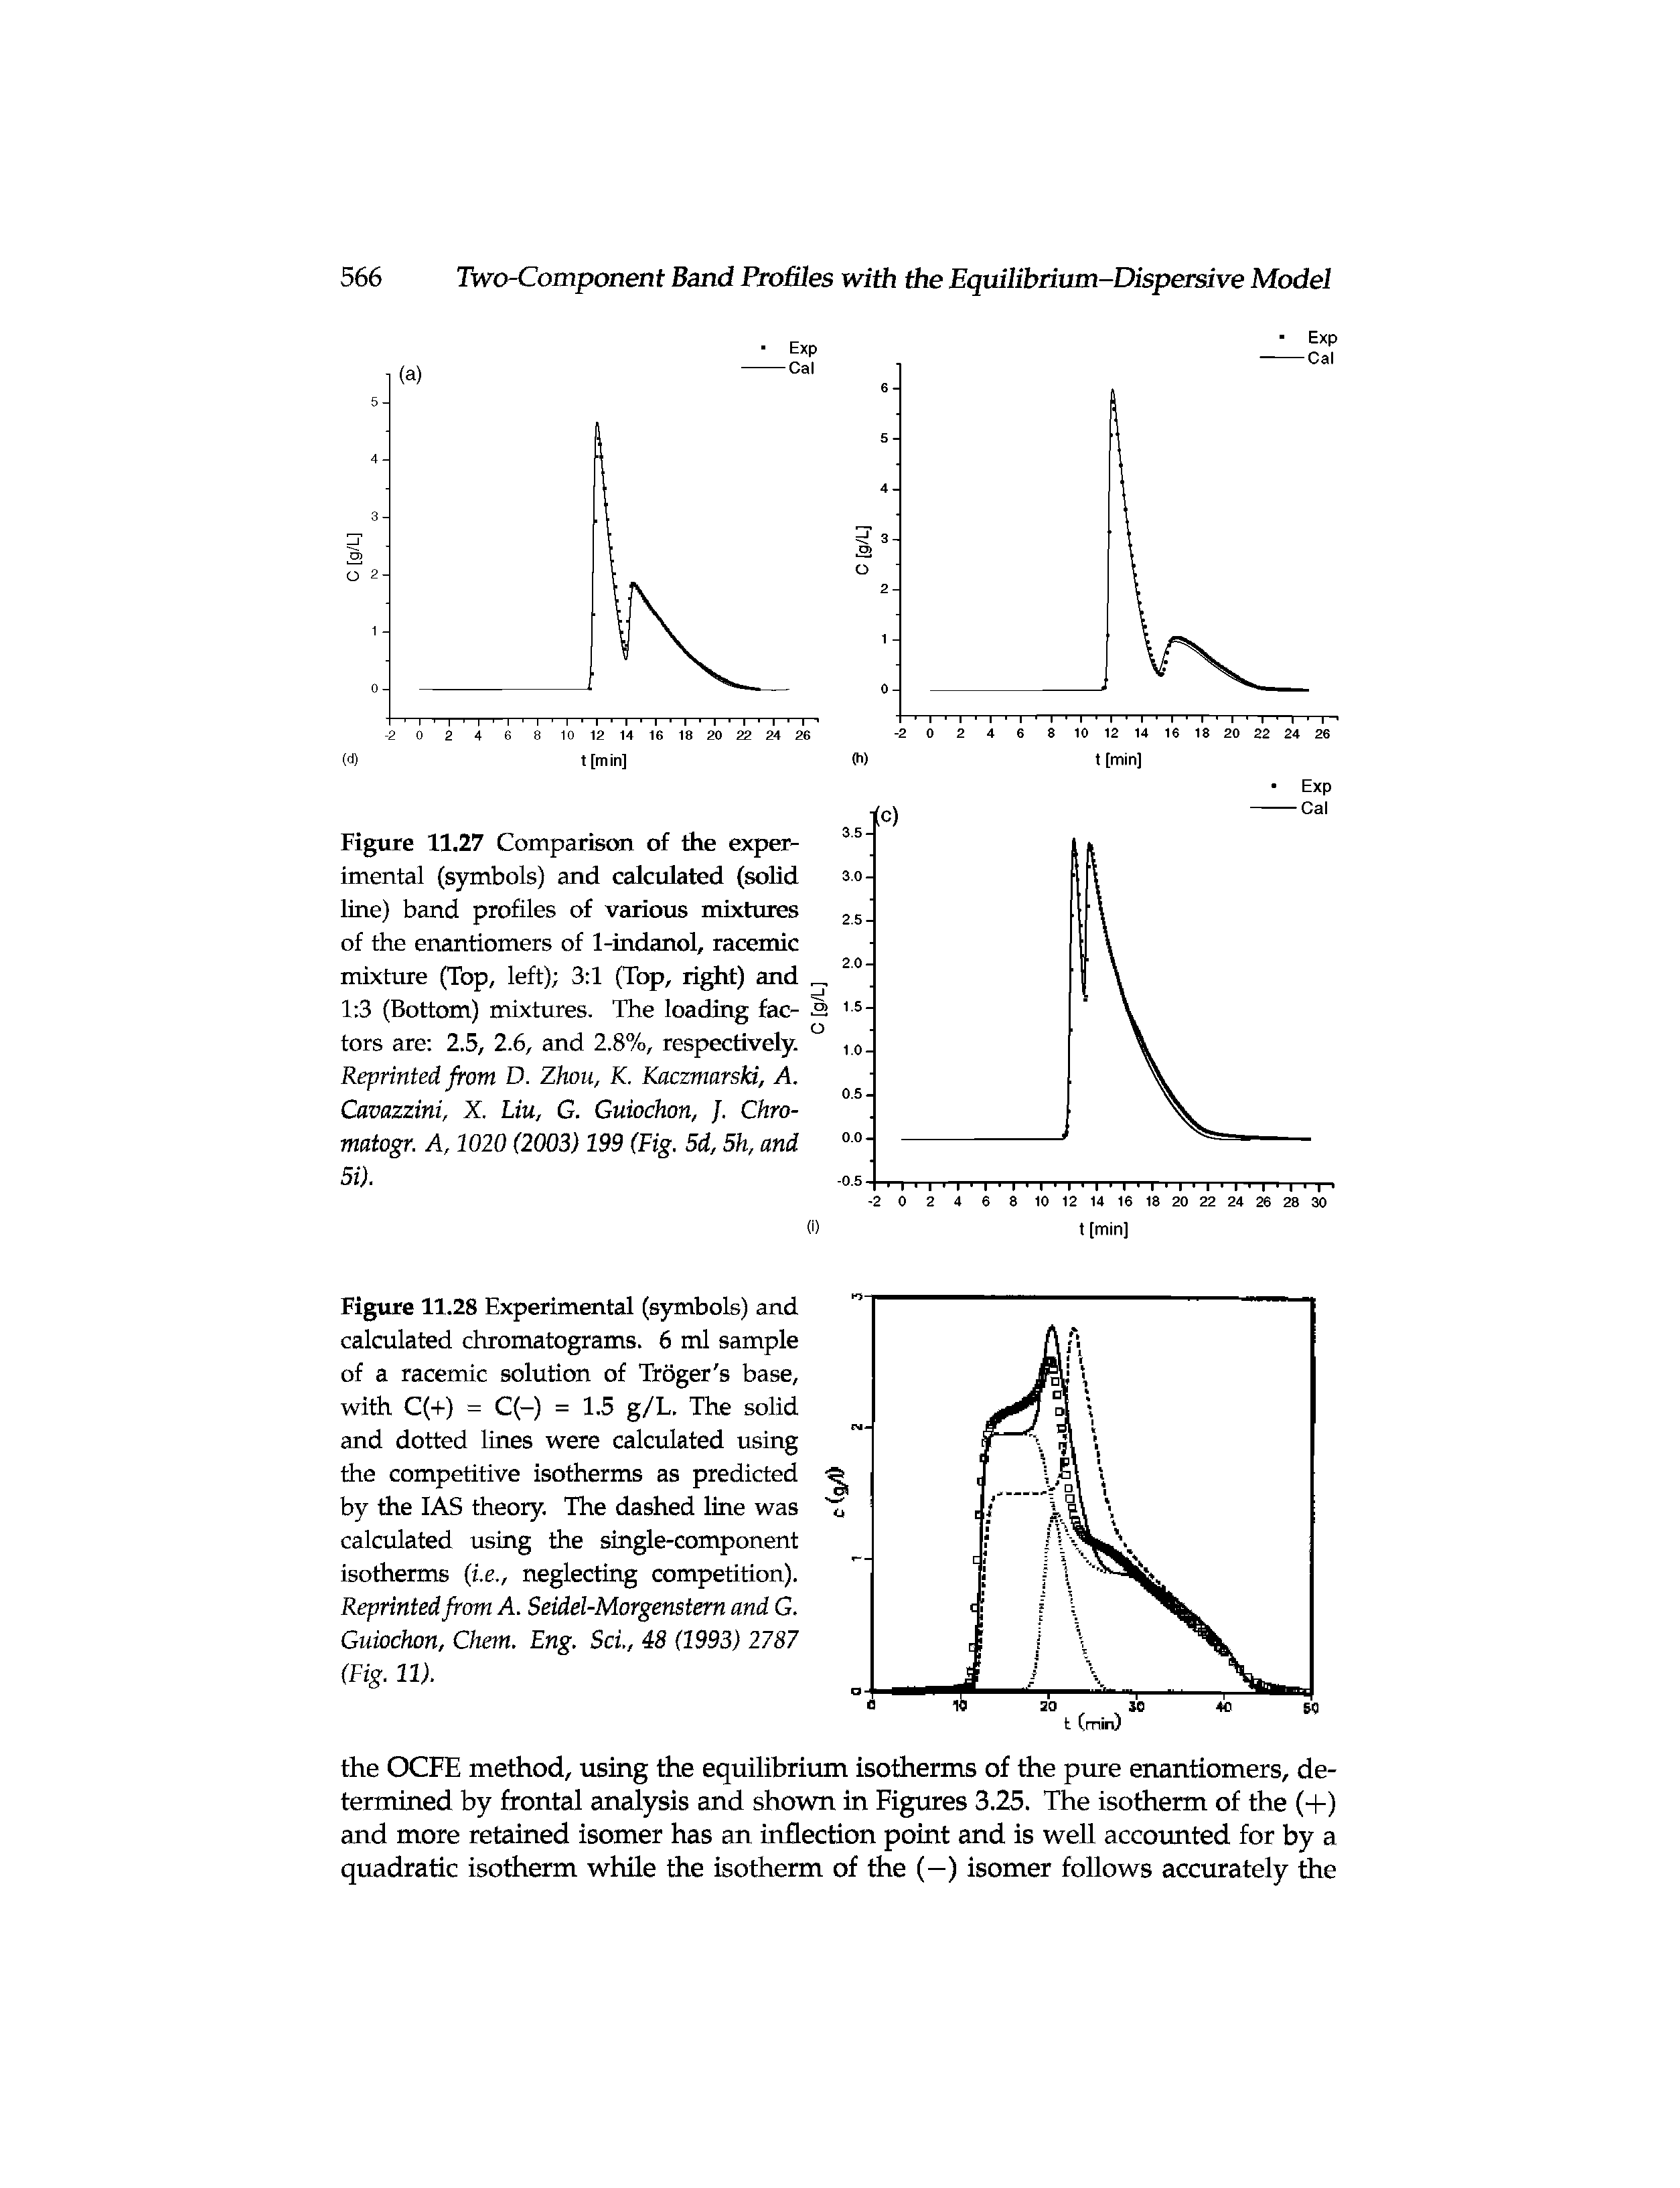 Figure 11.28 Experimental (symbols) and calculated chromatograms. 6 ml sample of a racemic solution of Troger s base, with C(+) = C(-) = 1.5 g/L. The solid and dotted lines were calculated using the competitive isotherms as predicted by the IAS theory. The dashed line was calculated using the single-component isotherms (i.e., neglecting competition). Reprinted from A. Seidel-Morgenstern and G. Guiochon, Chem. Eng. ScL, 48 (1993) 2787 (Fig. 11).